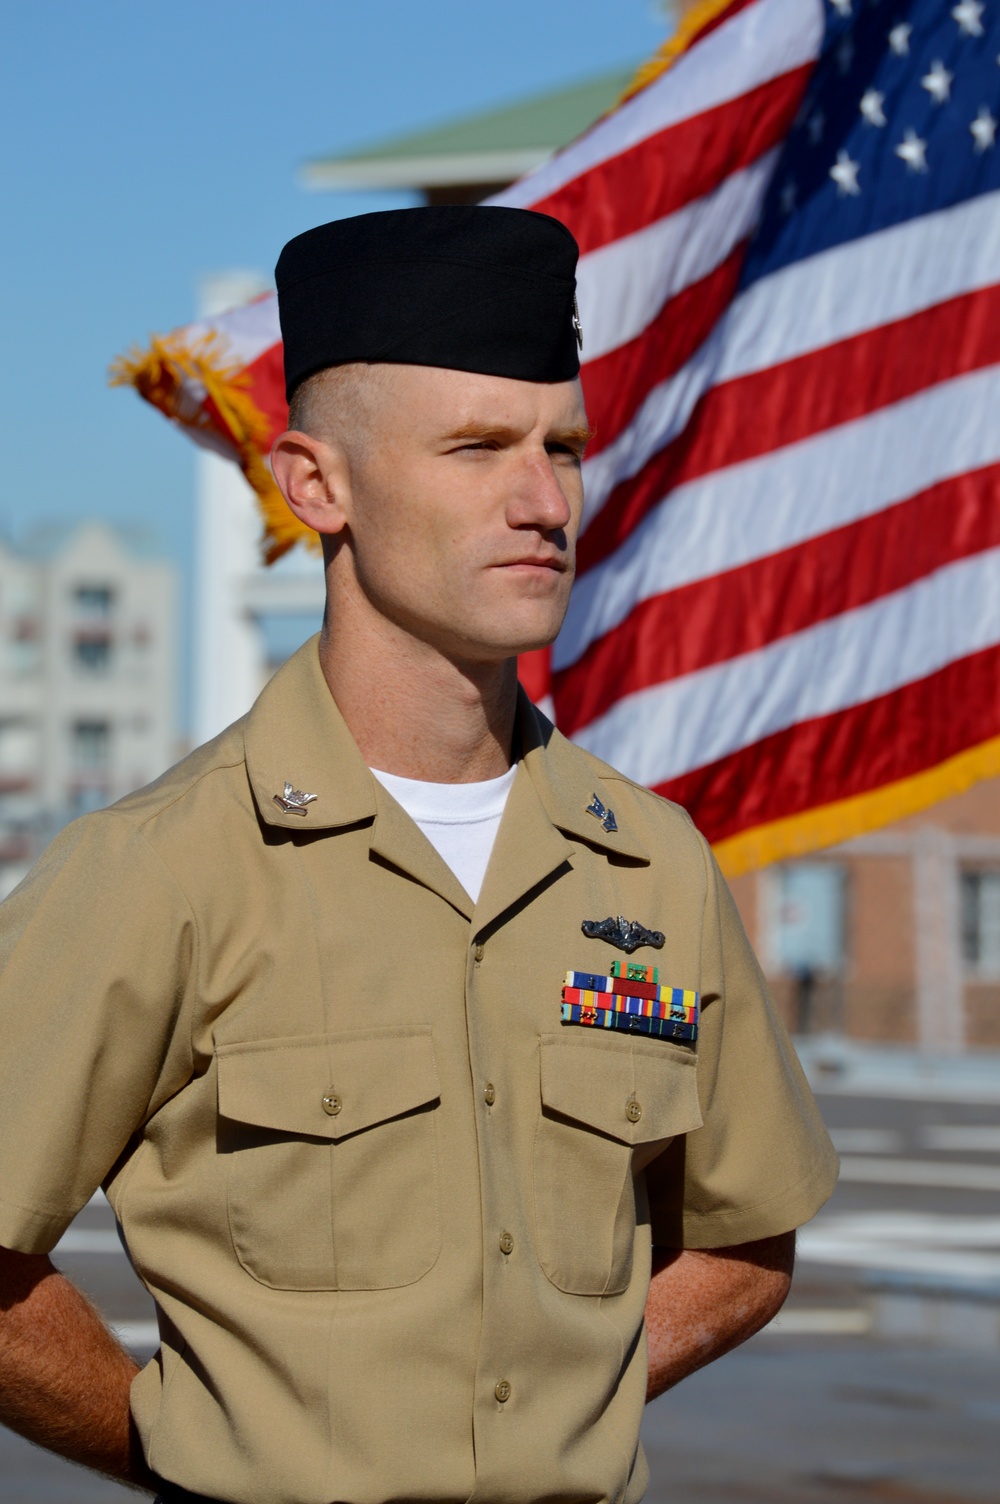 Retirement of a Chief Petty Officer